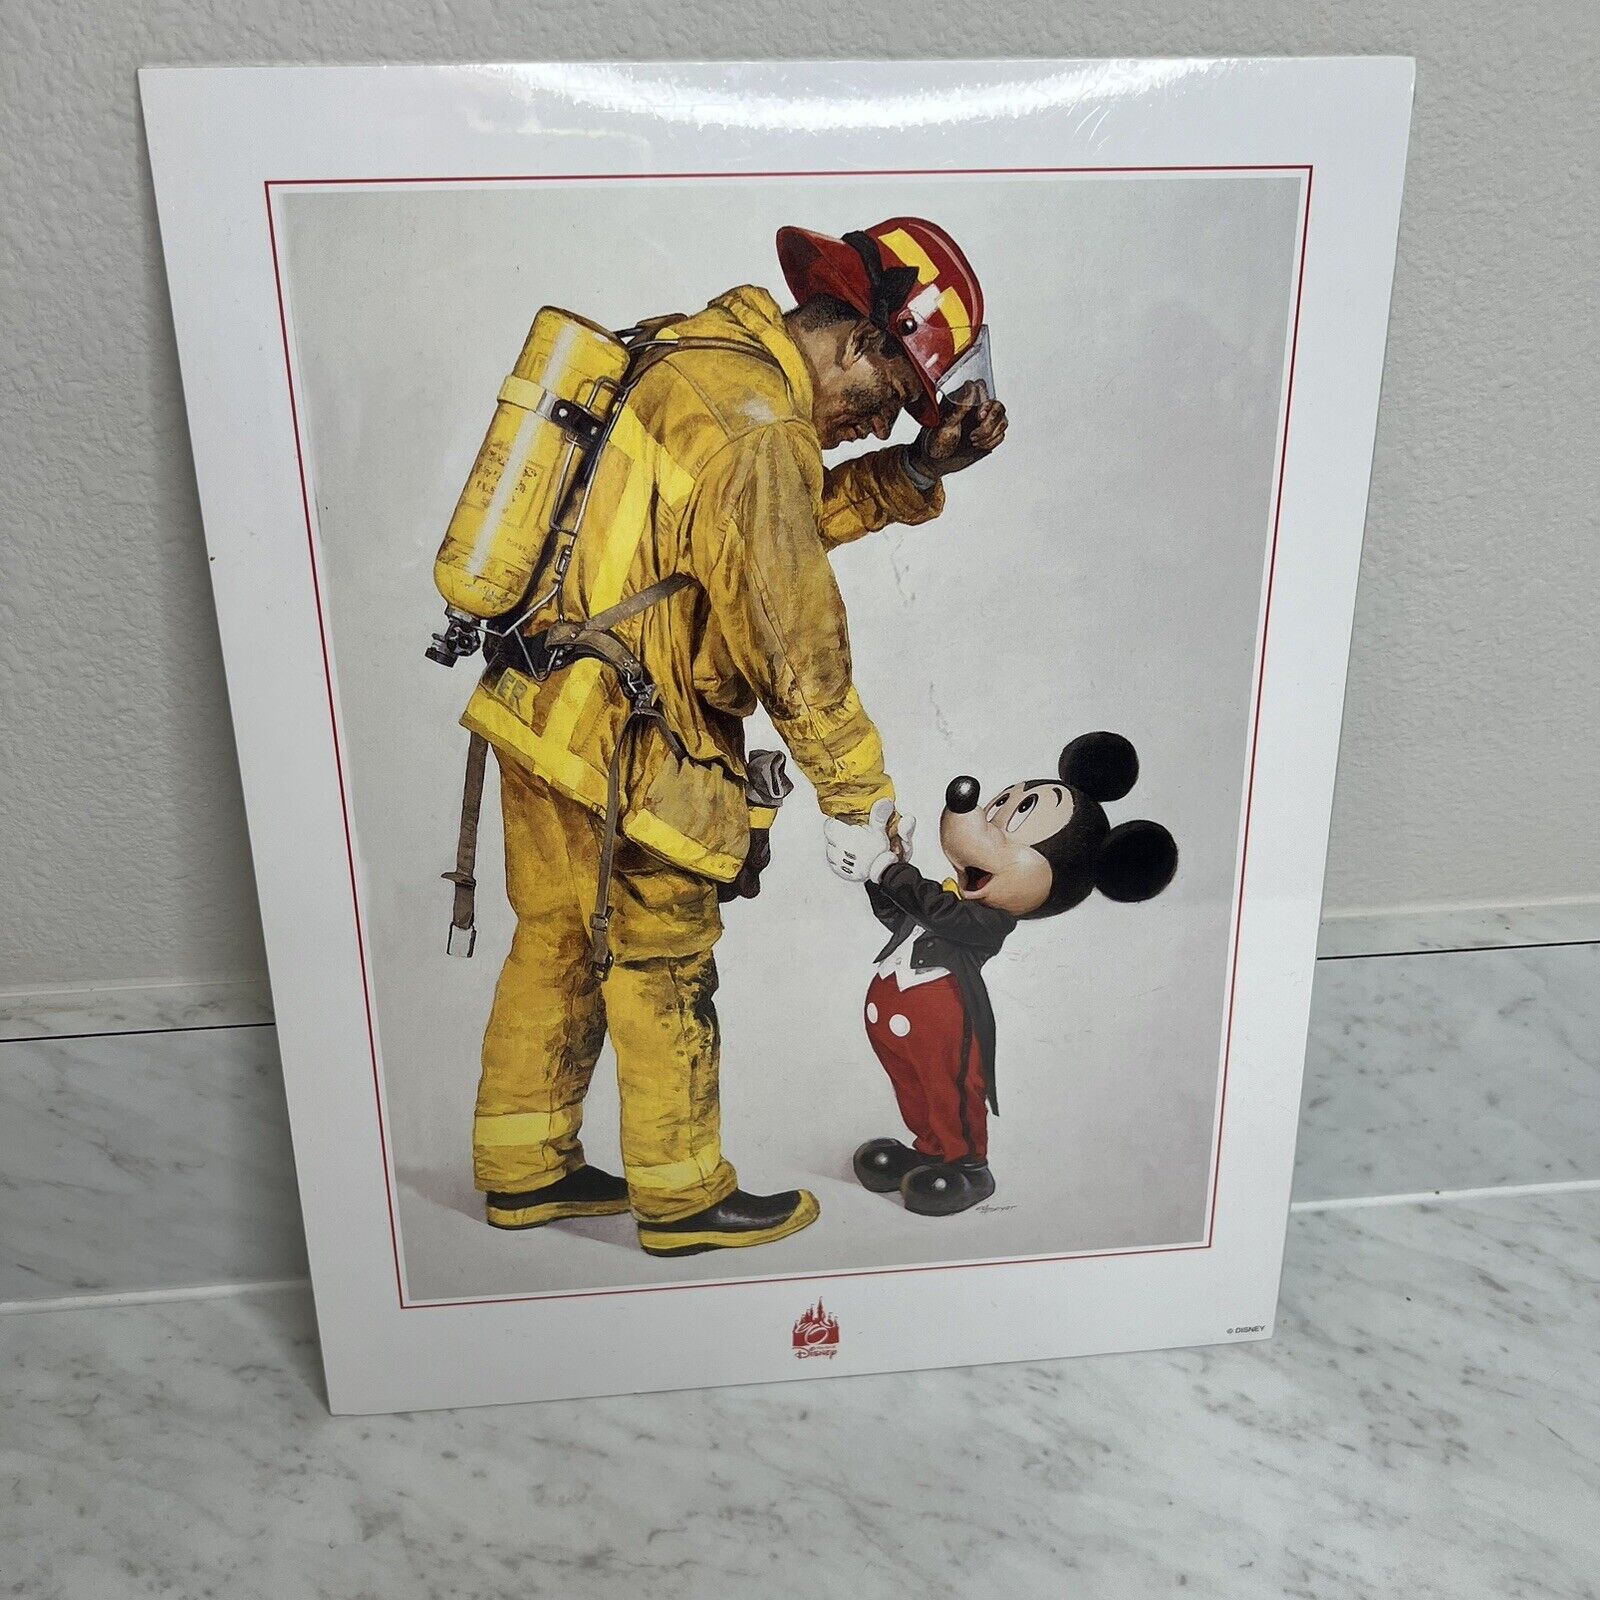 NEW SEALED Disney Mickey Tribute To Firefighters Art Print 11 x 14 Charles Boyer